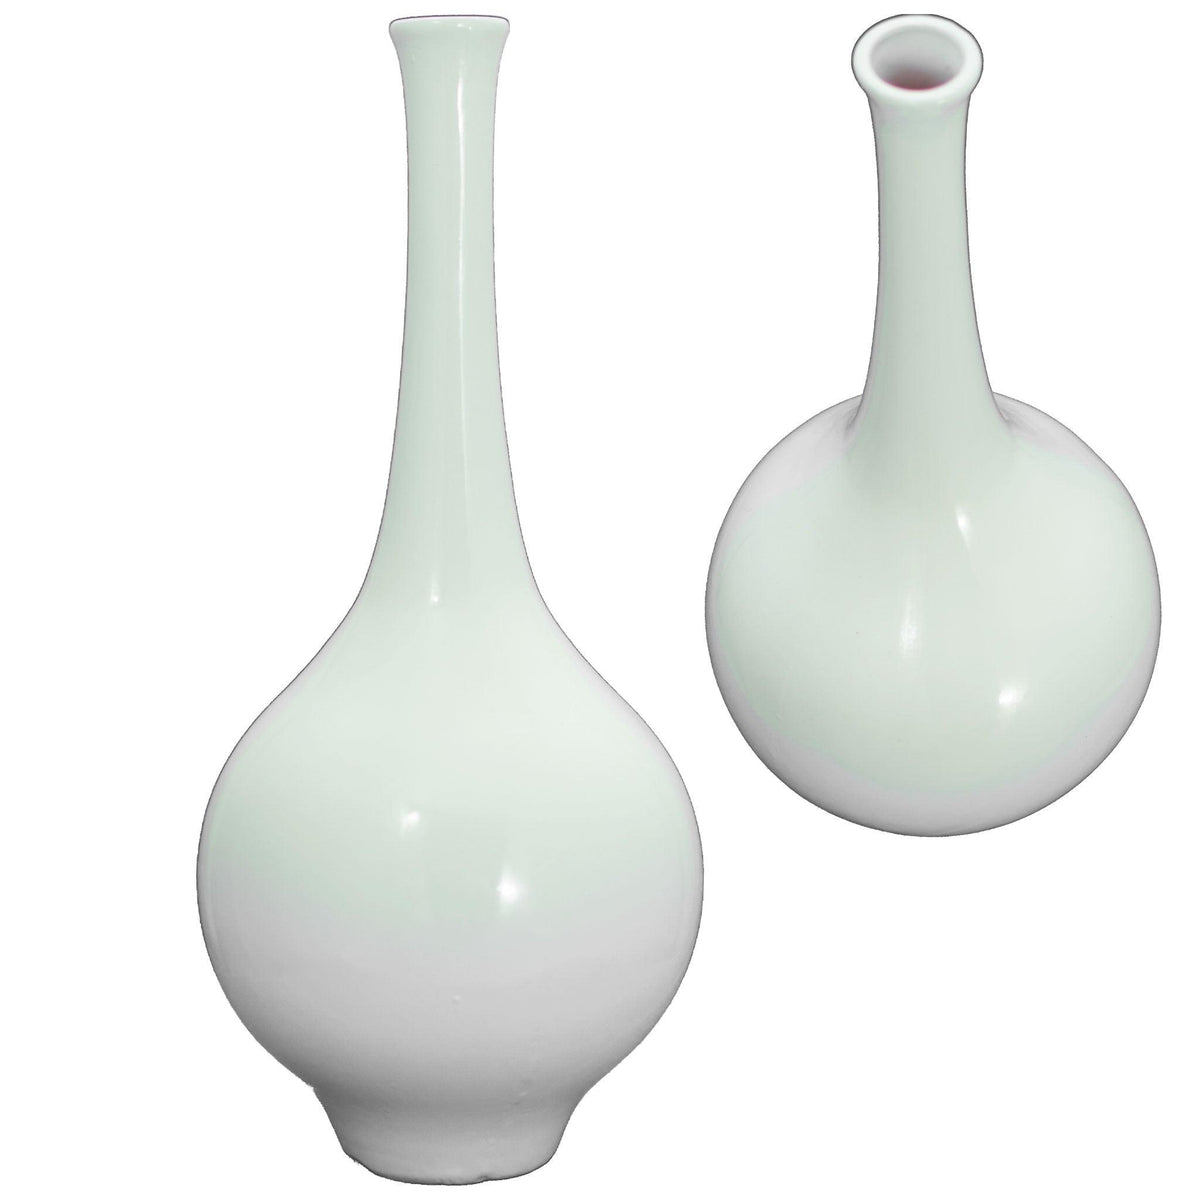 Lee Display's brand new 20in Hydria Ceramic Vase Shape with a High Gloss White Finish on sale at leedisplay.com